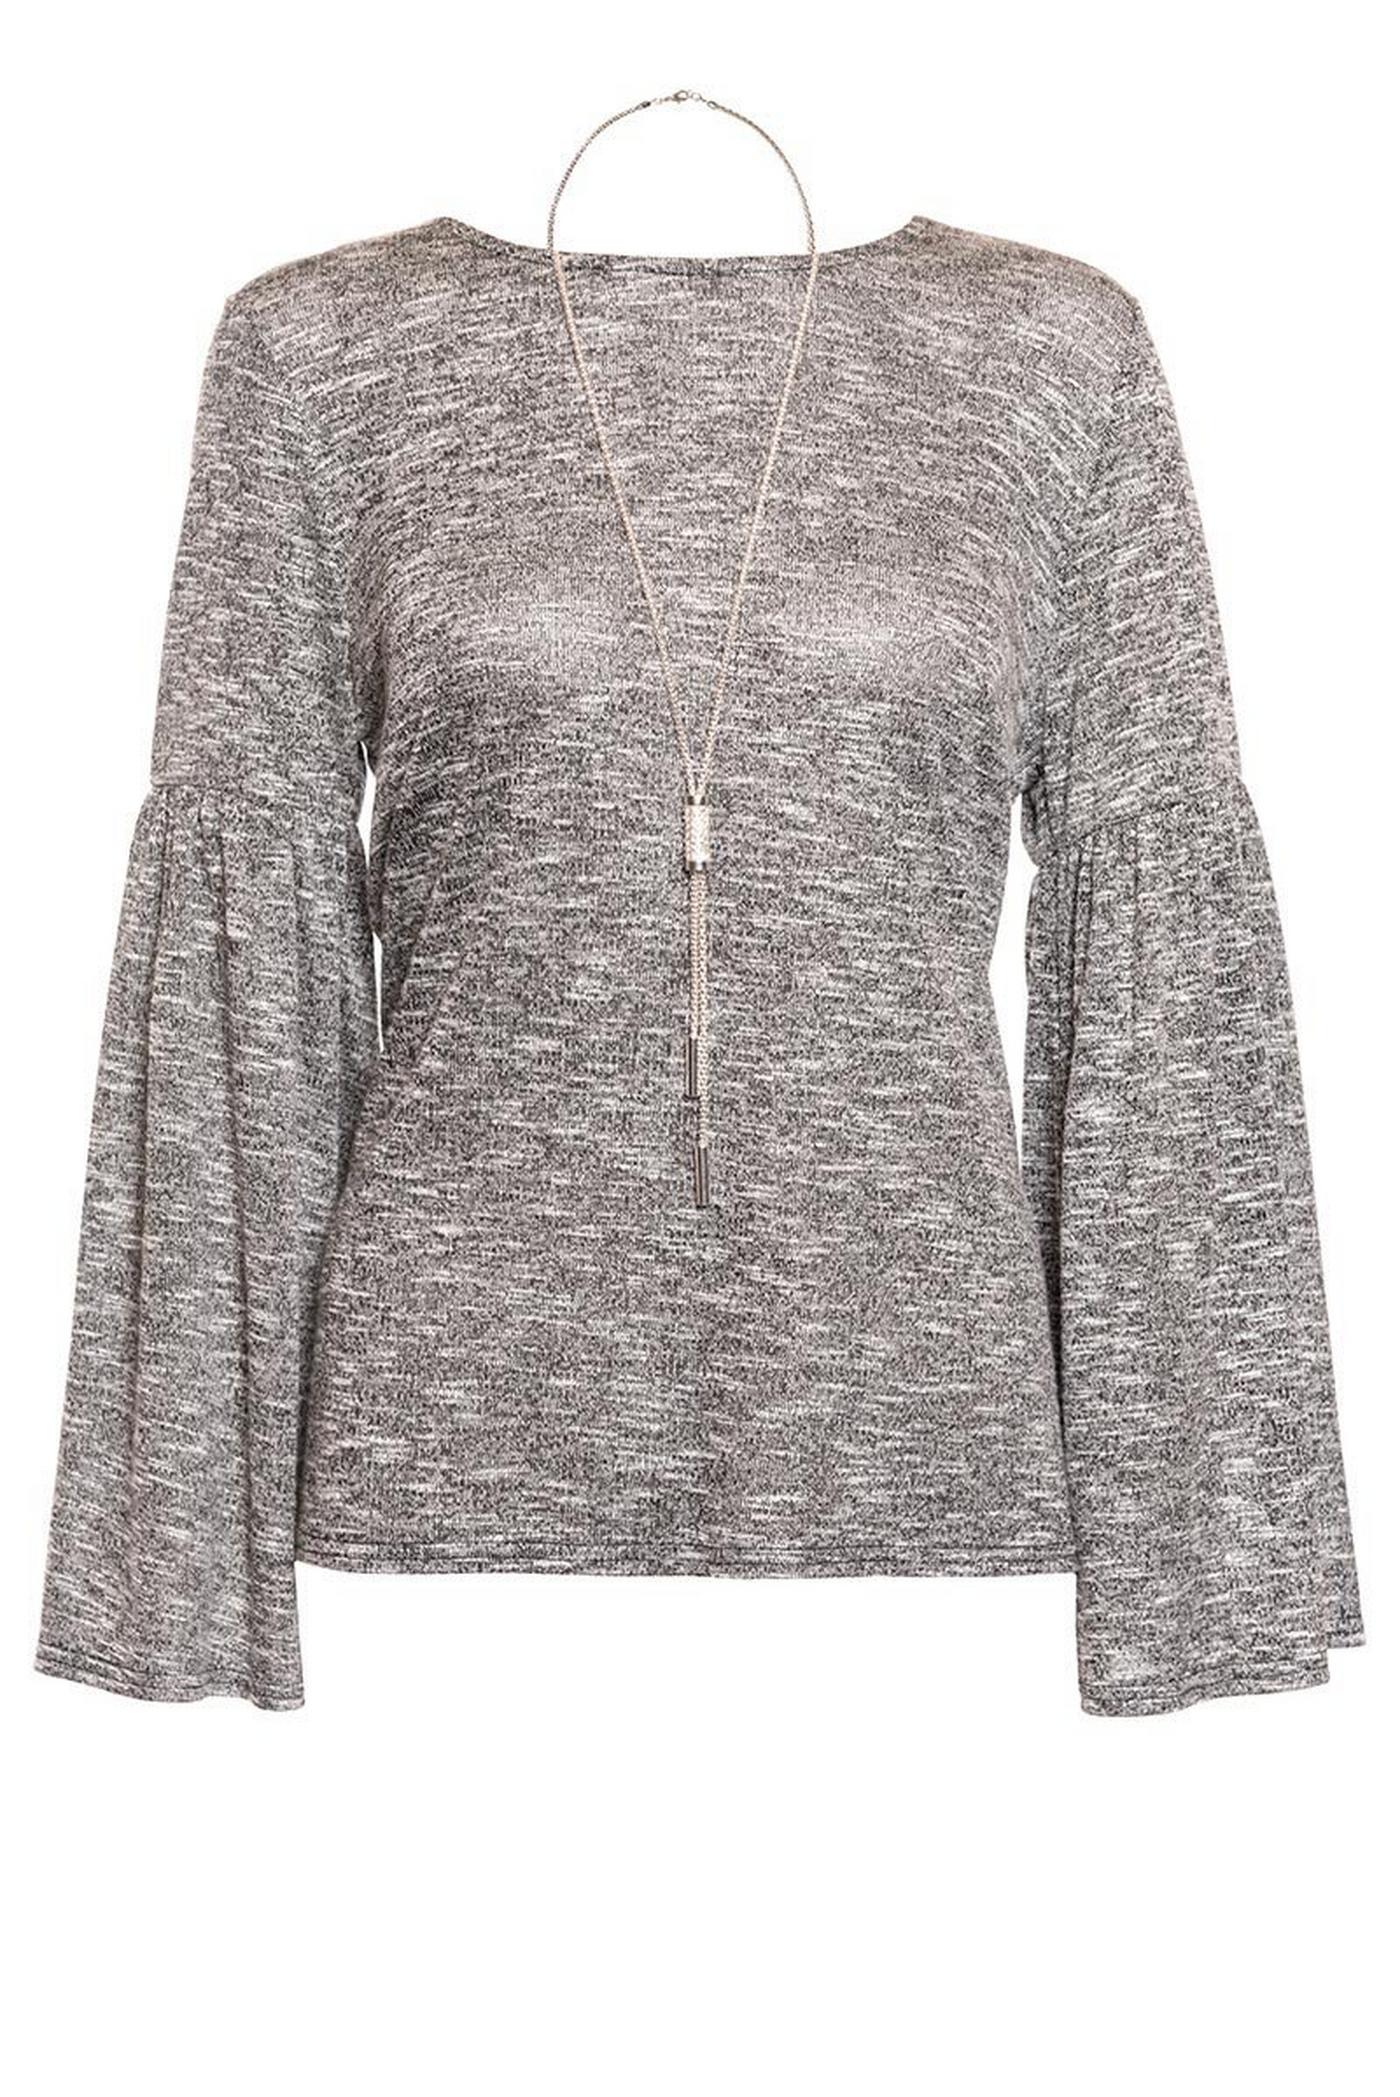 Grey Light Knit Ruffle Sleeve Necklace Top